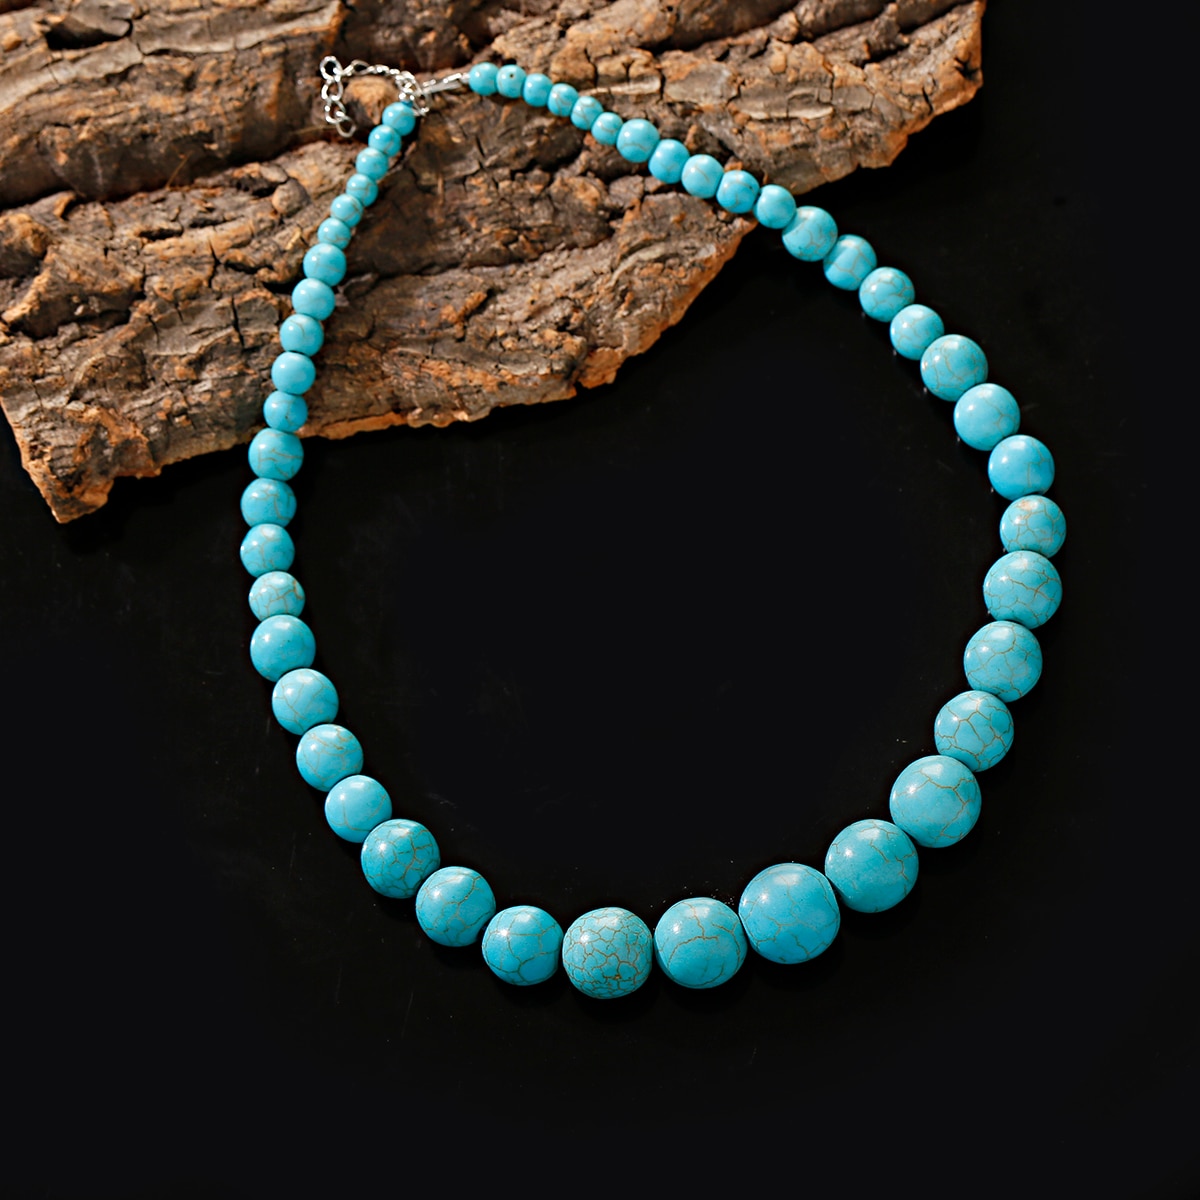 2022-Gypsy-Boho-Round-Turquoises-Necklace-For-Women-Collares-Statement-Jewelry-Indian-Necklaces-Pend-1005004708964928-6